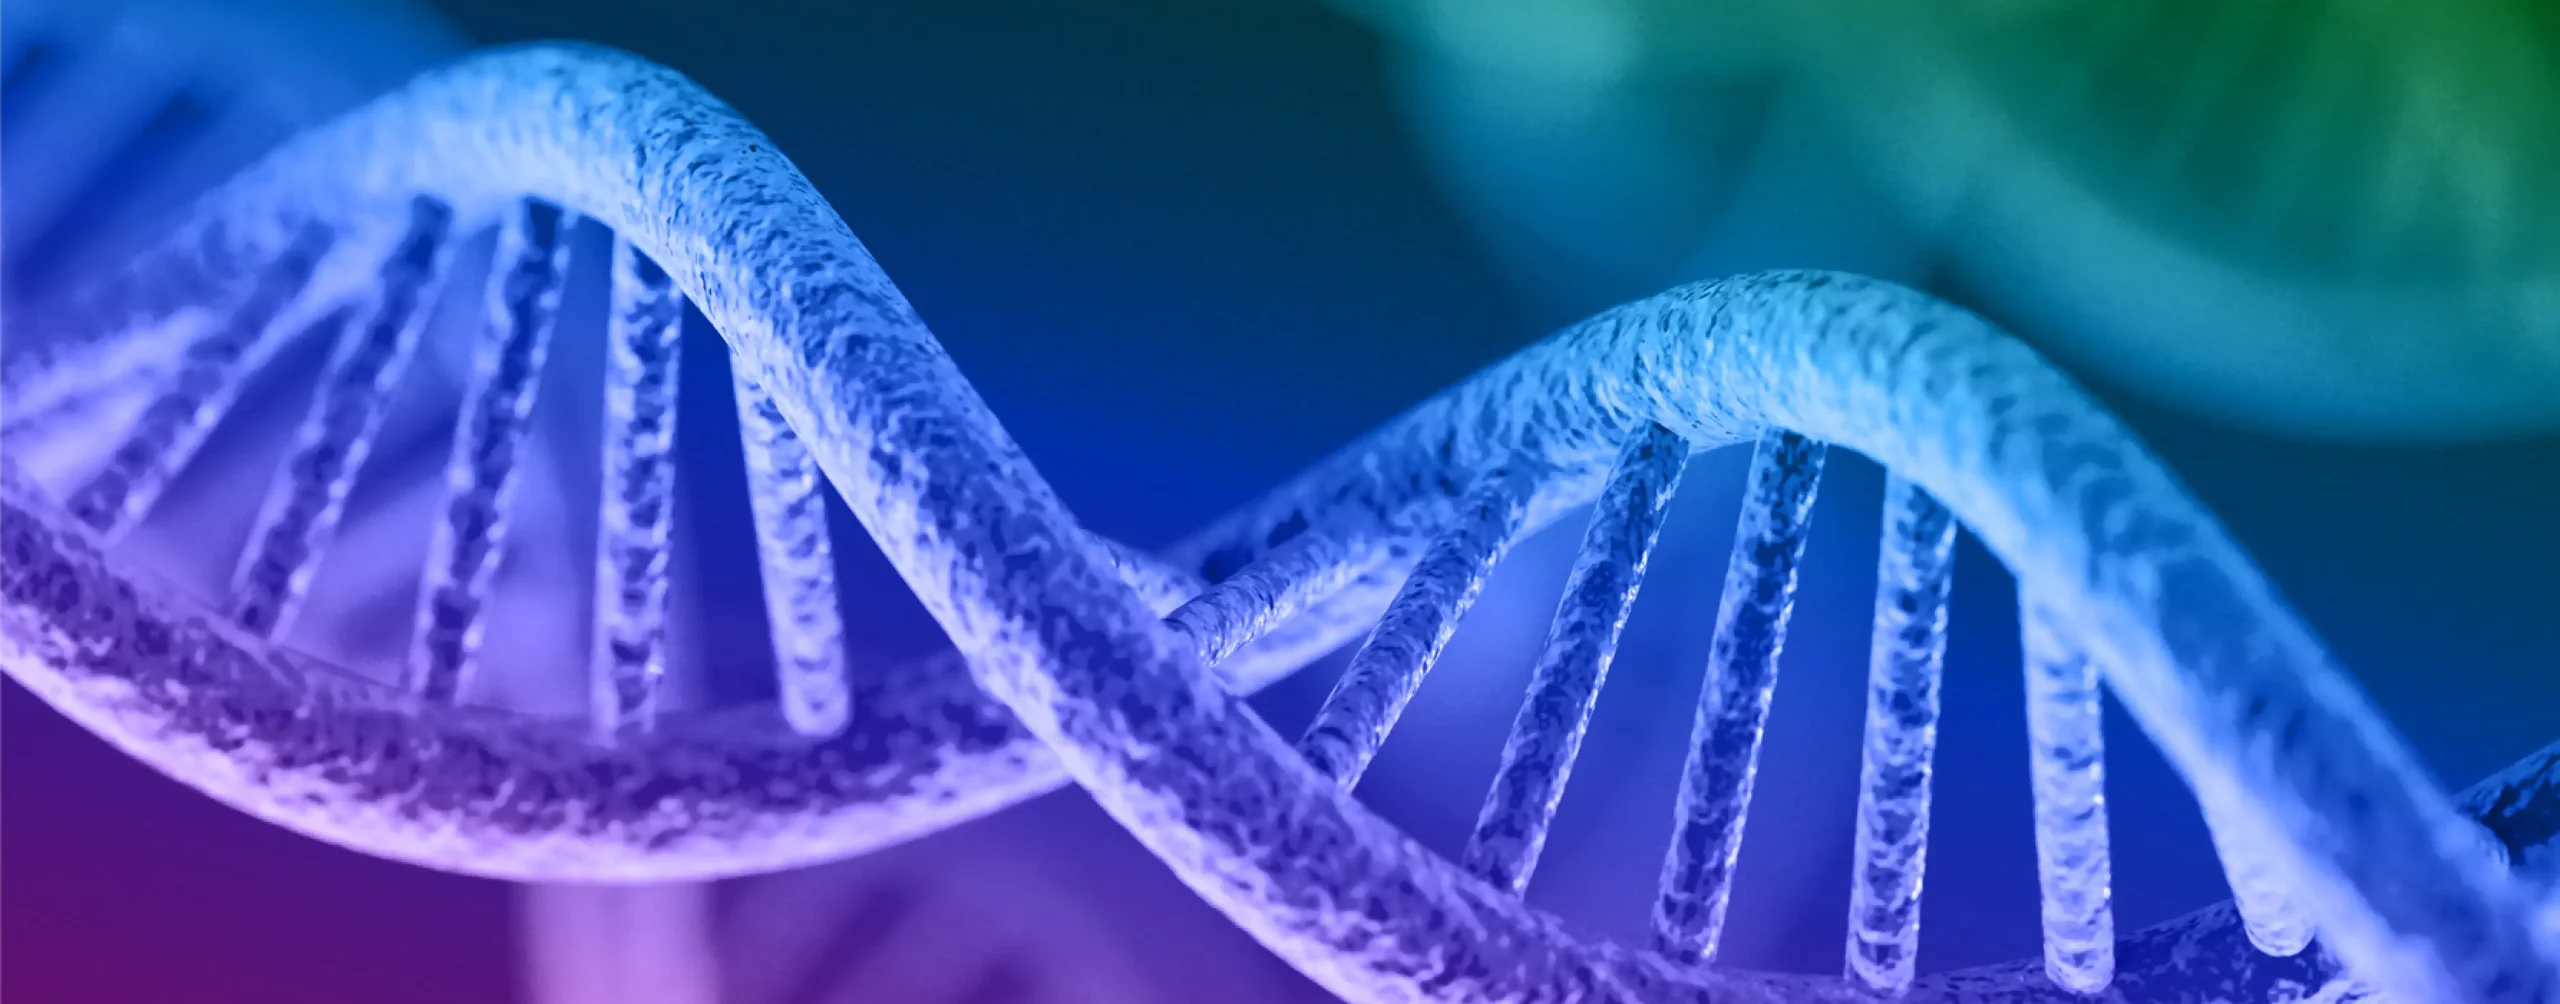 Stylized banner image of a DNA helix